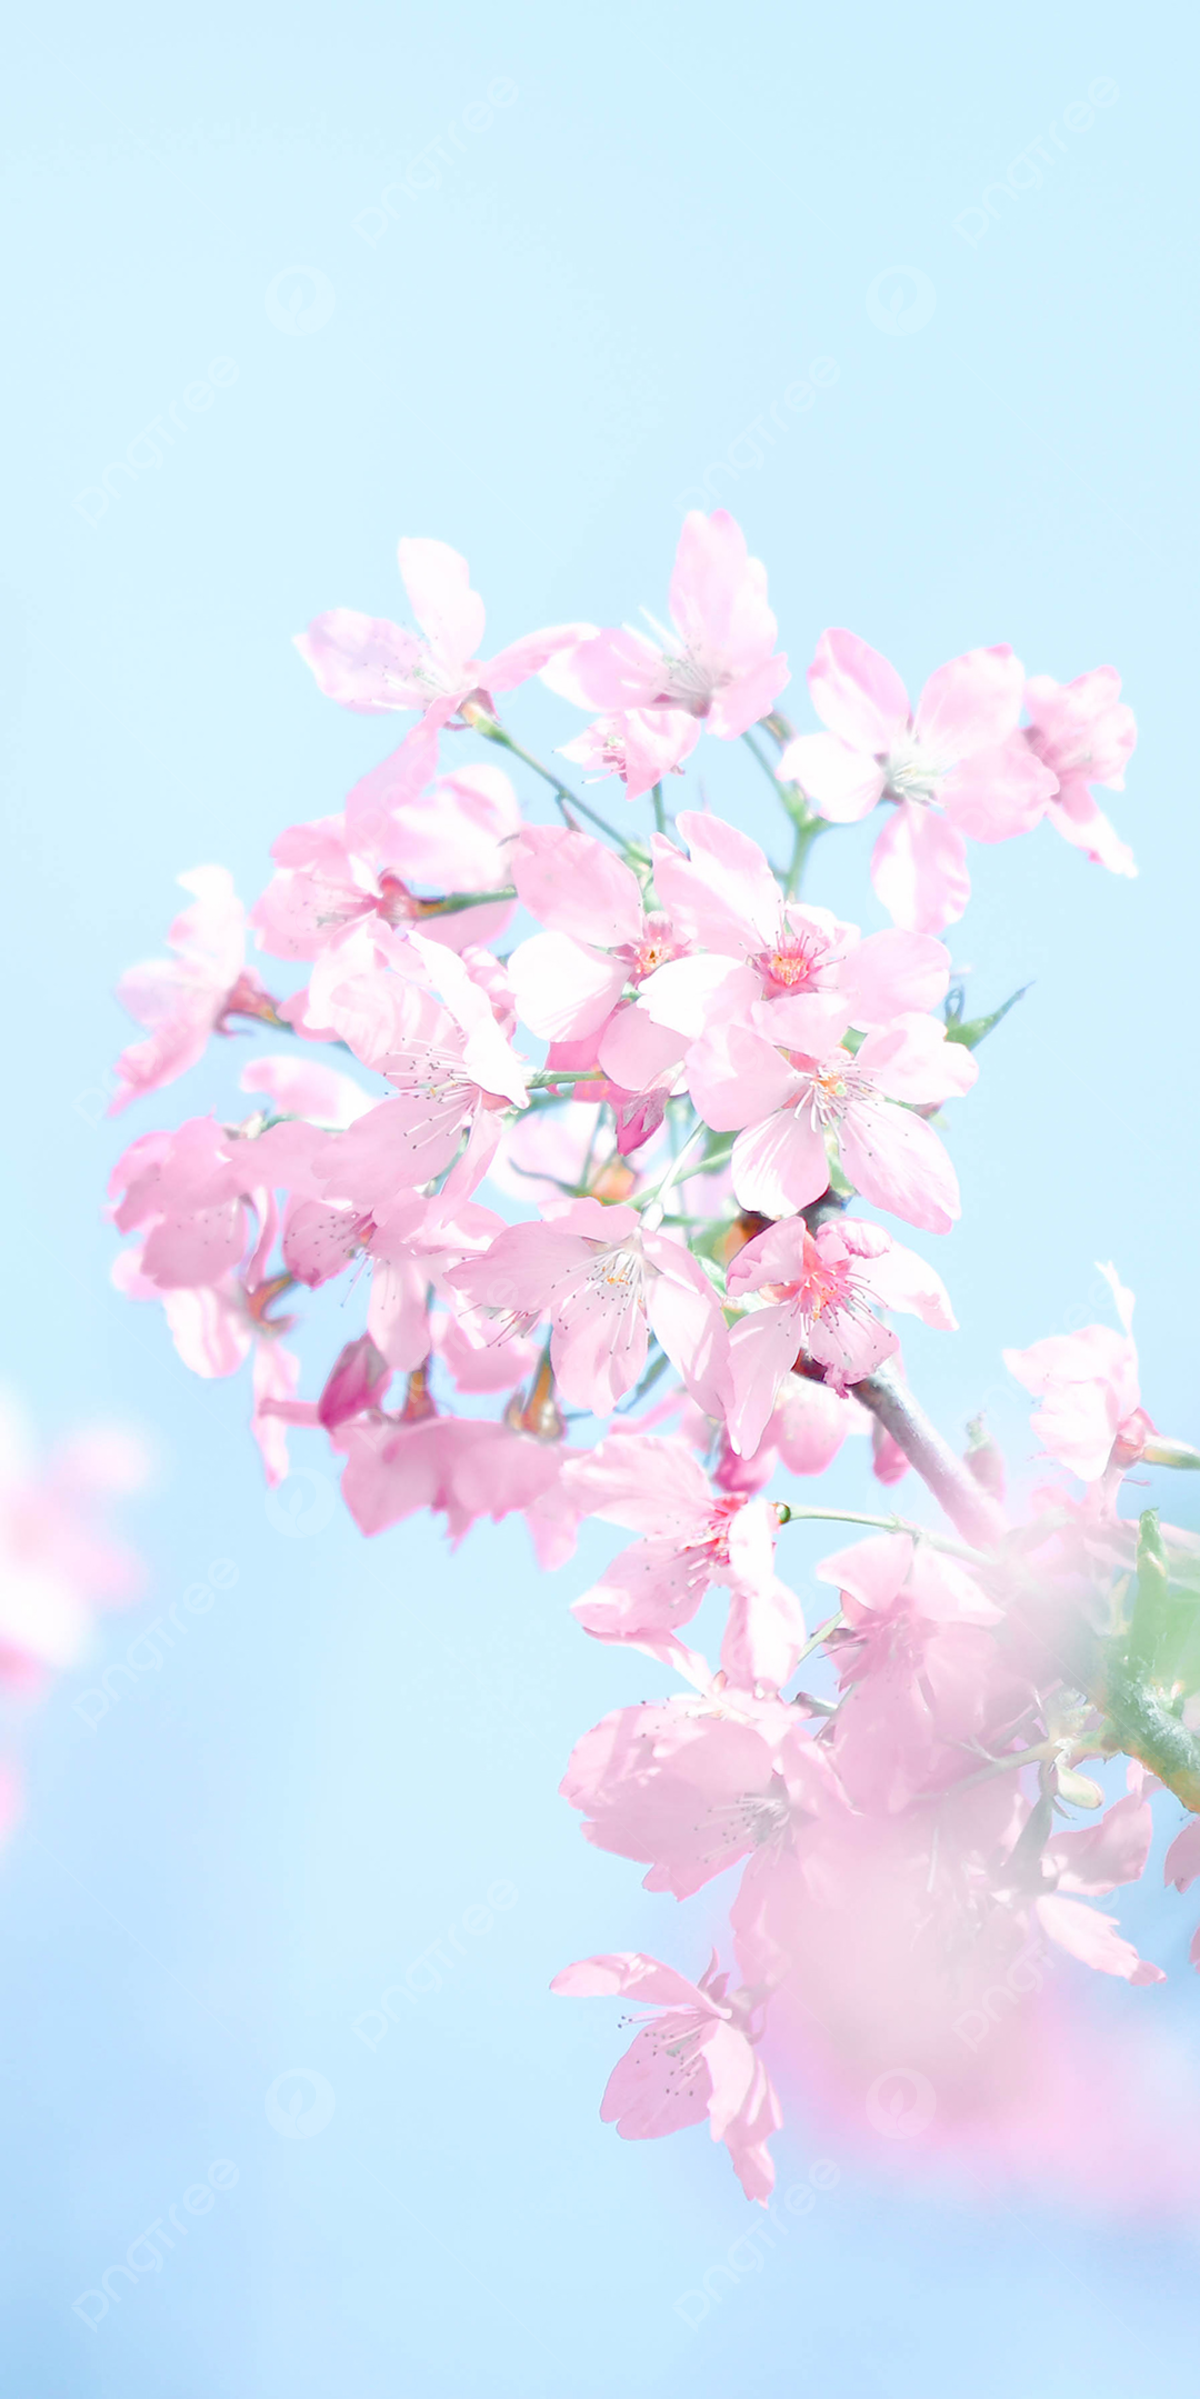 Sakura vertical photography picture pink cherry blossom romantic phone wallpaper background sakura cherry blossoms spring background image for free download